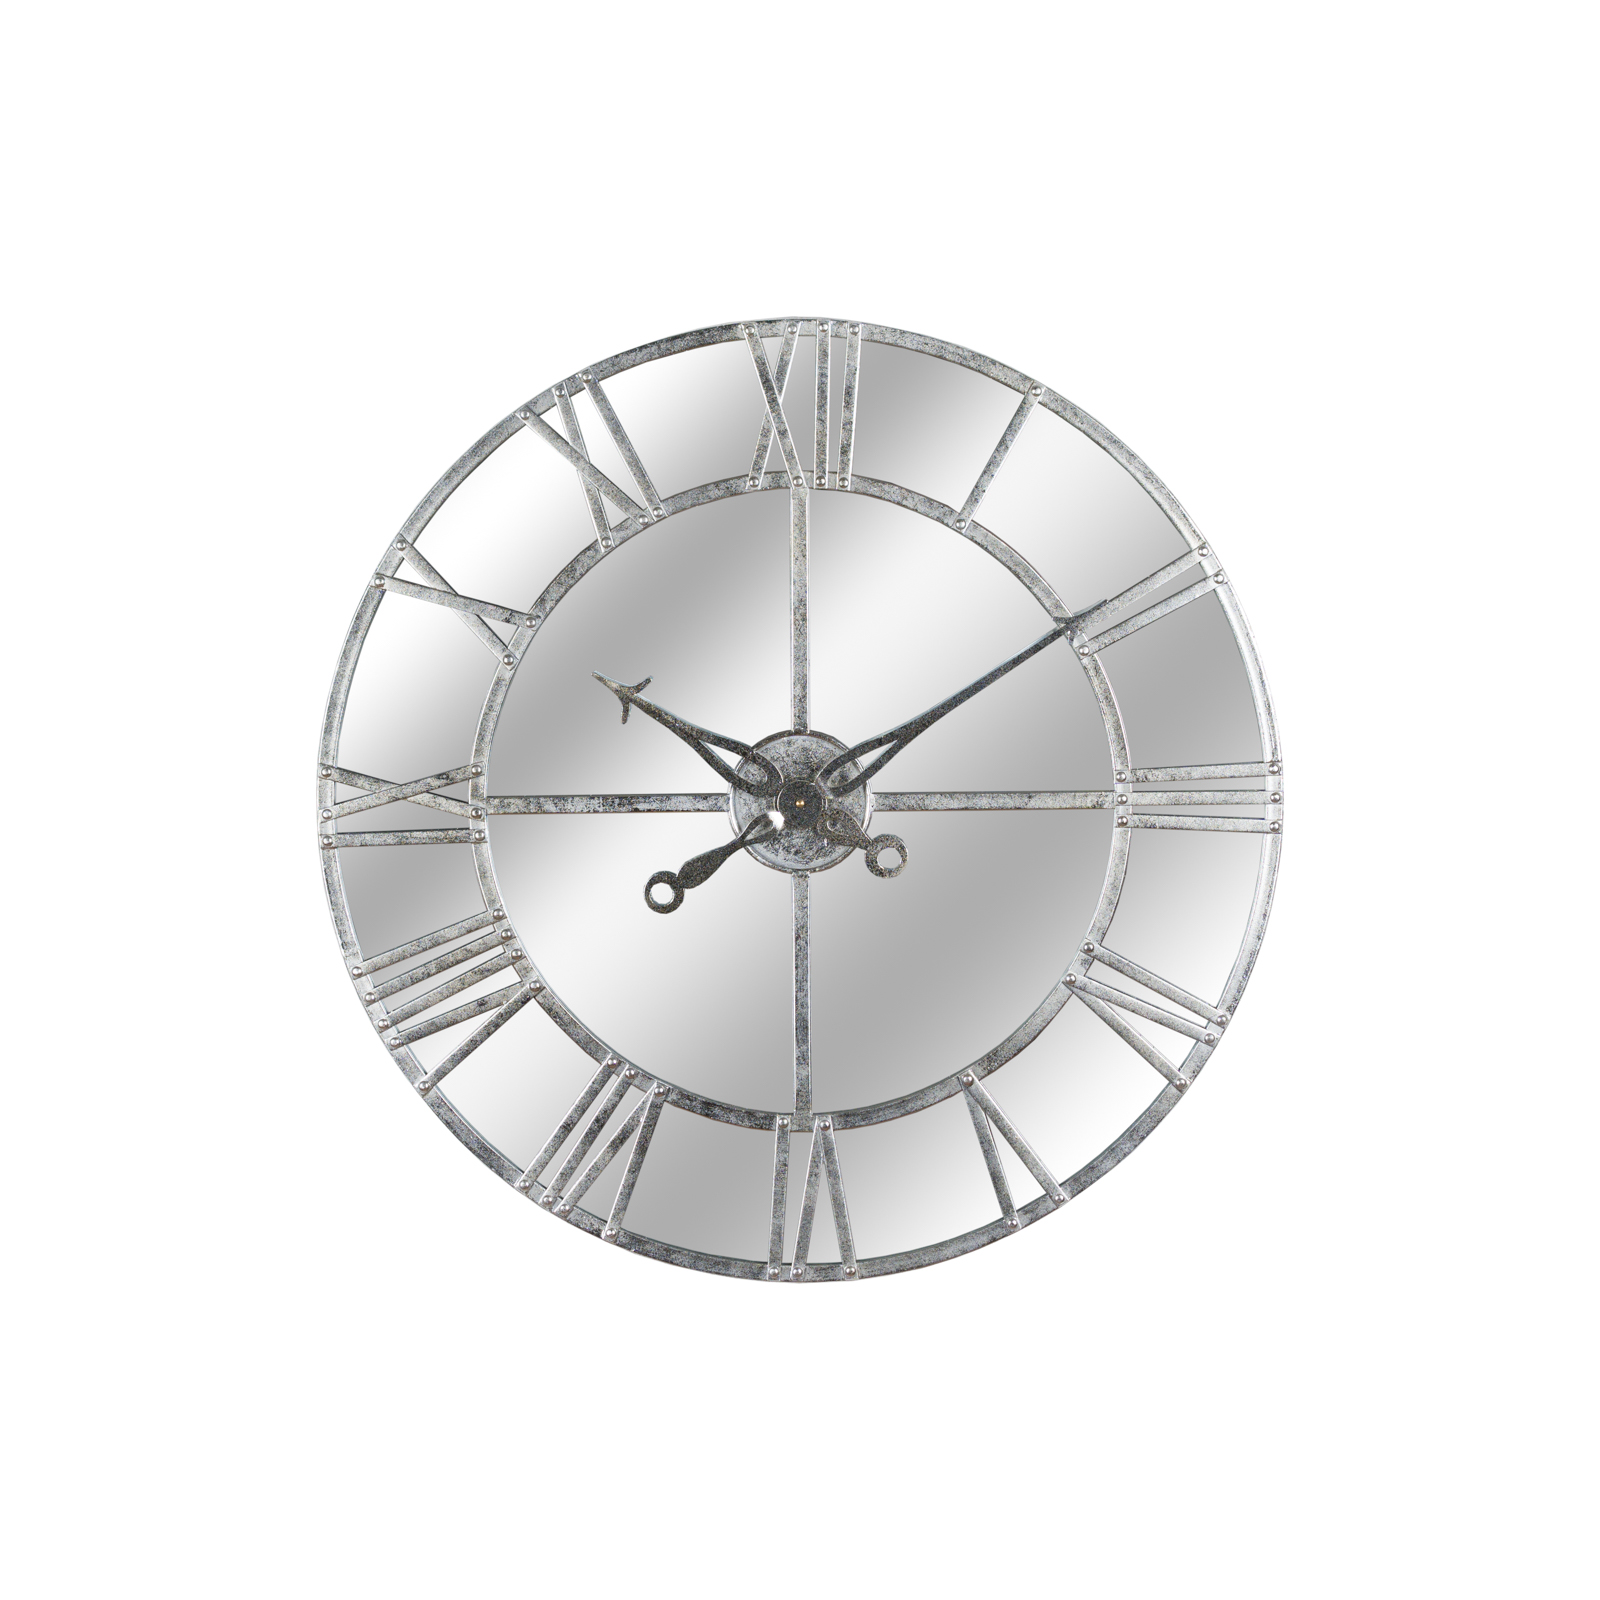 Silver Foil Mirrored Wall Clock - Image 1